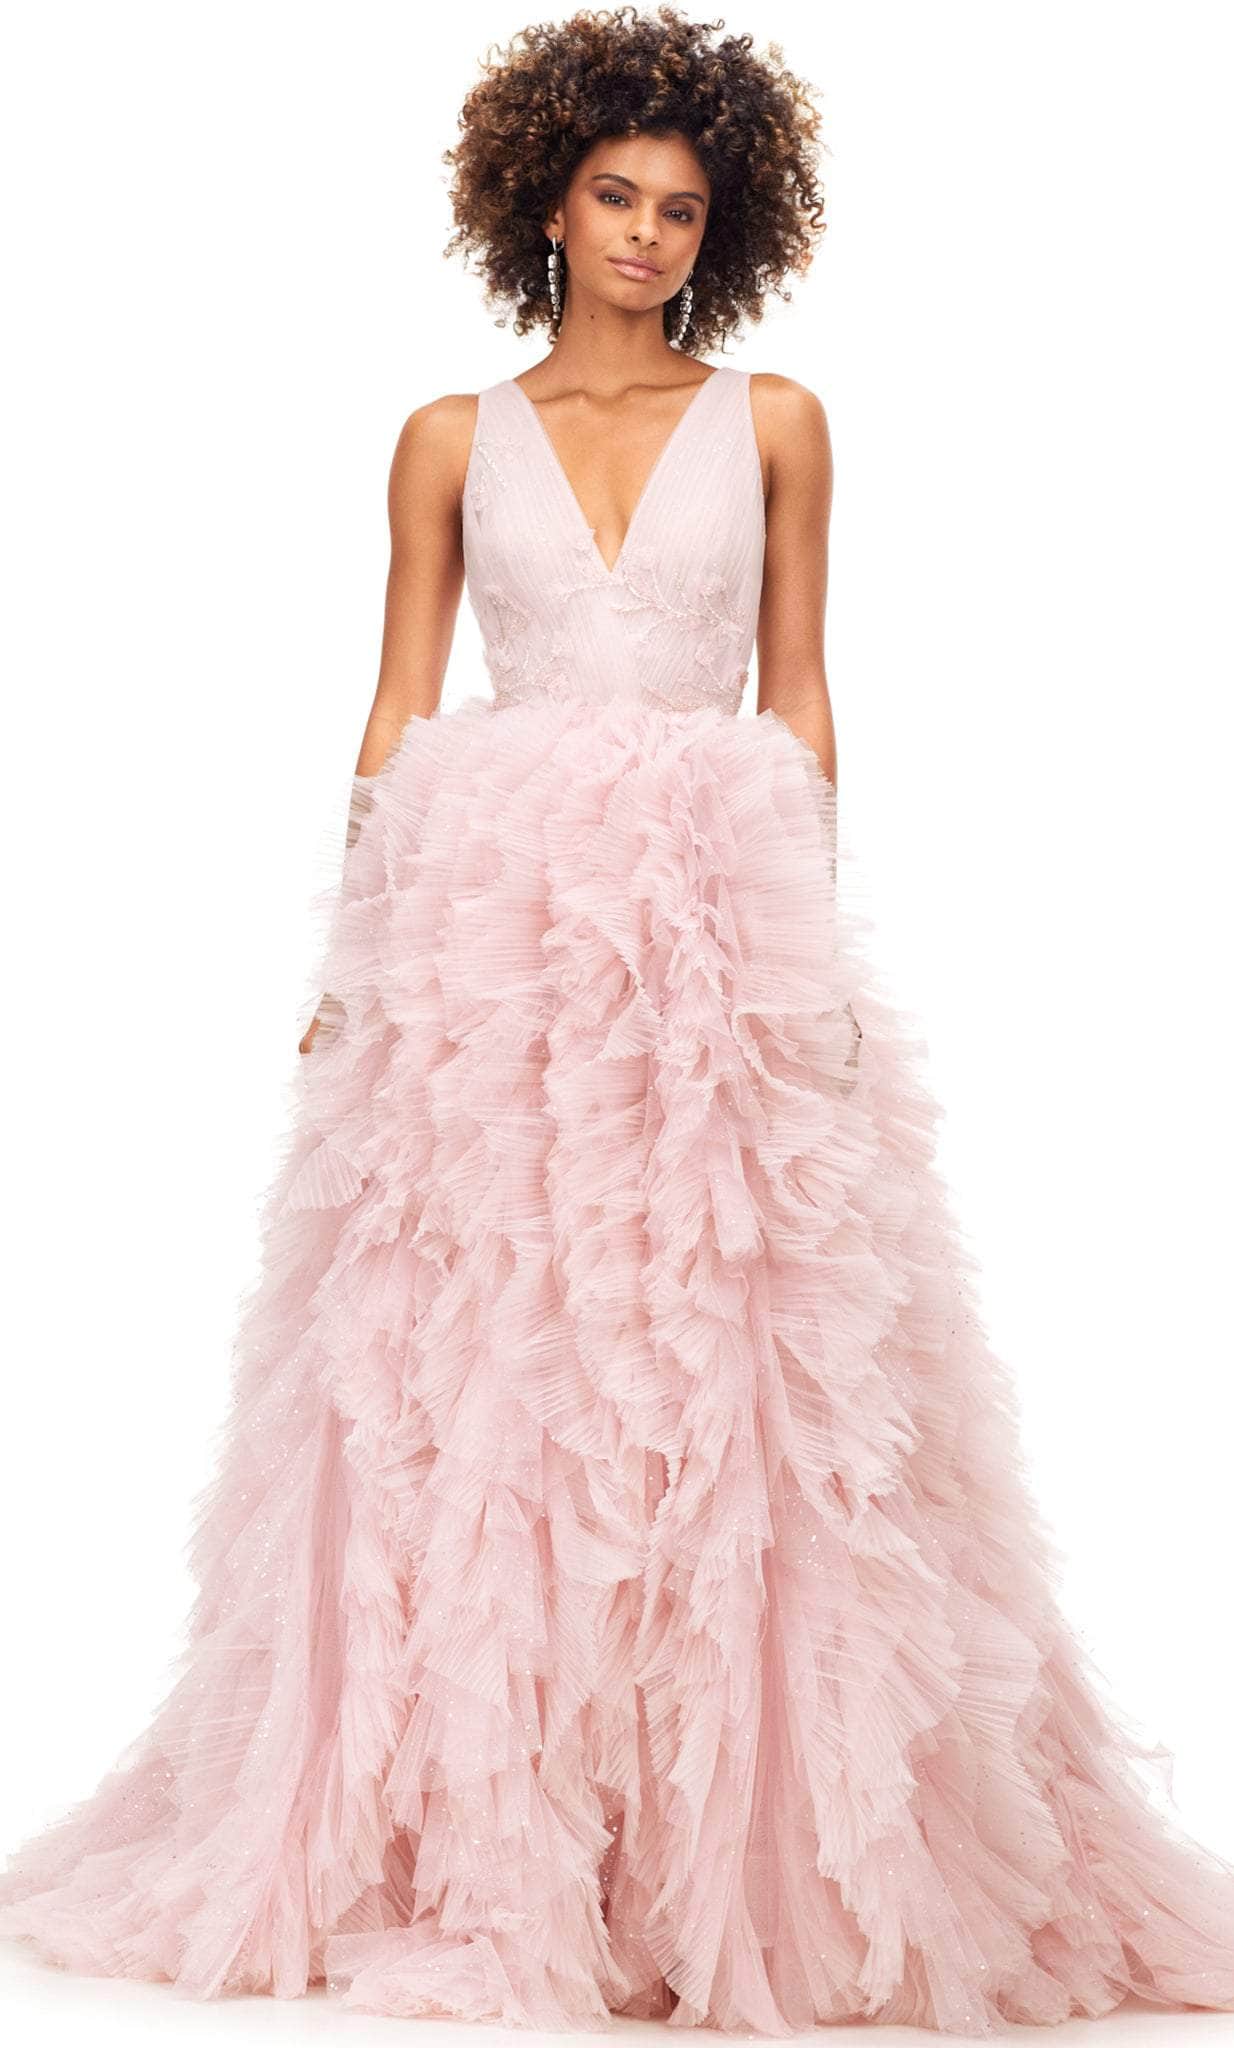 Ashley Lauren 11233 - A-line Ruffled Voluminous Tulle Gown Special Occasion Dress 0 / Blush